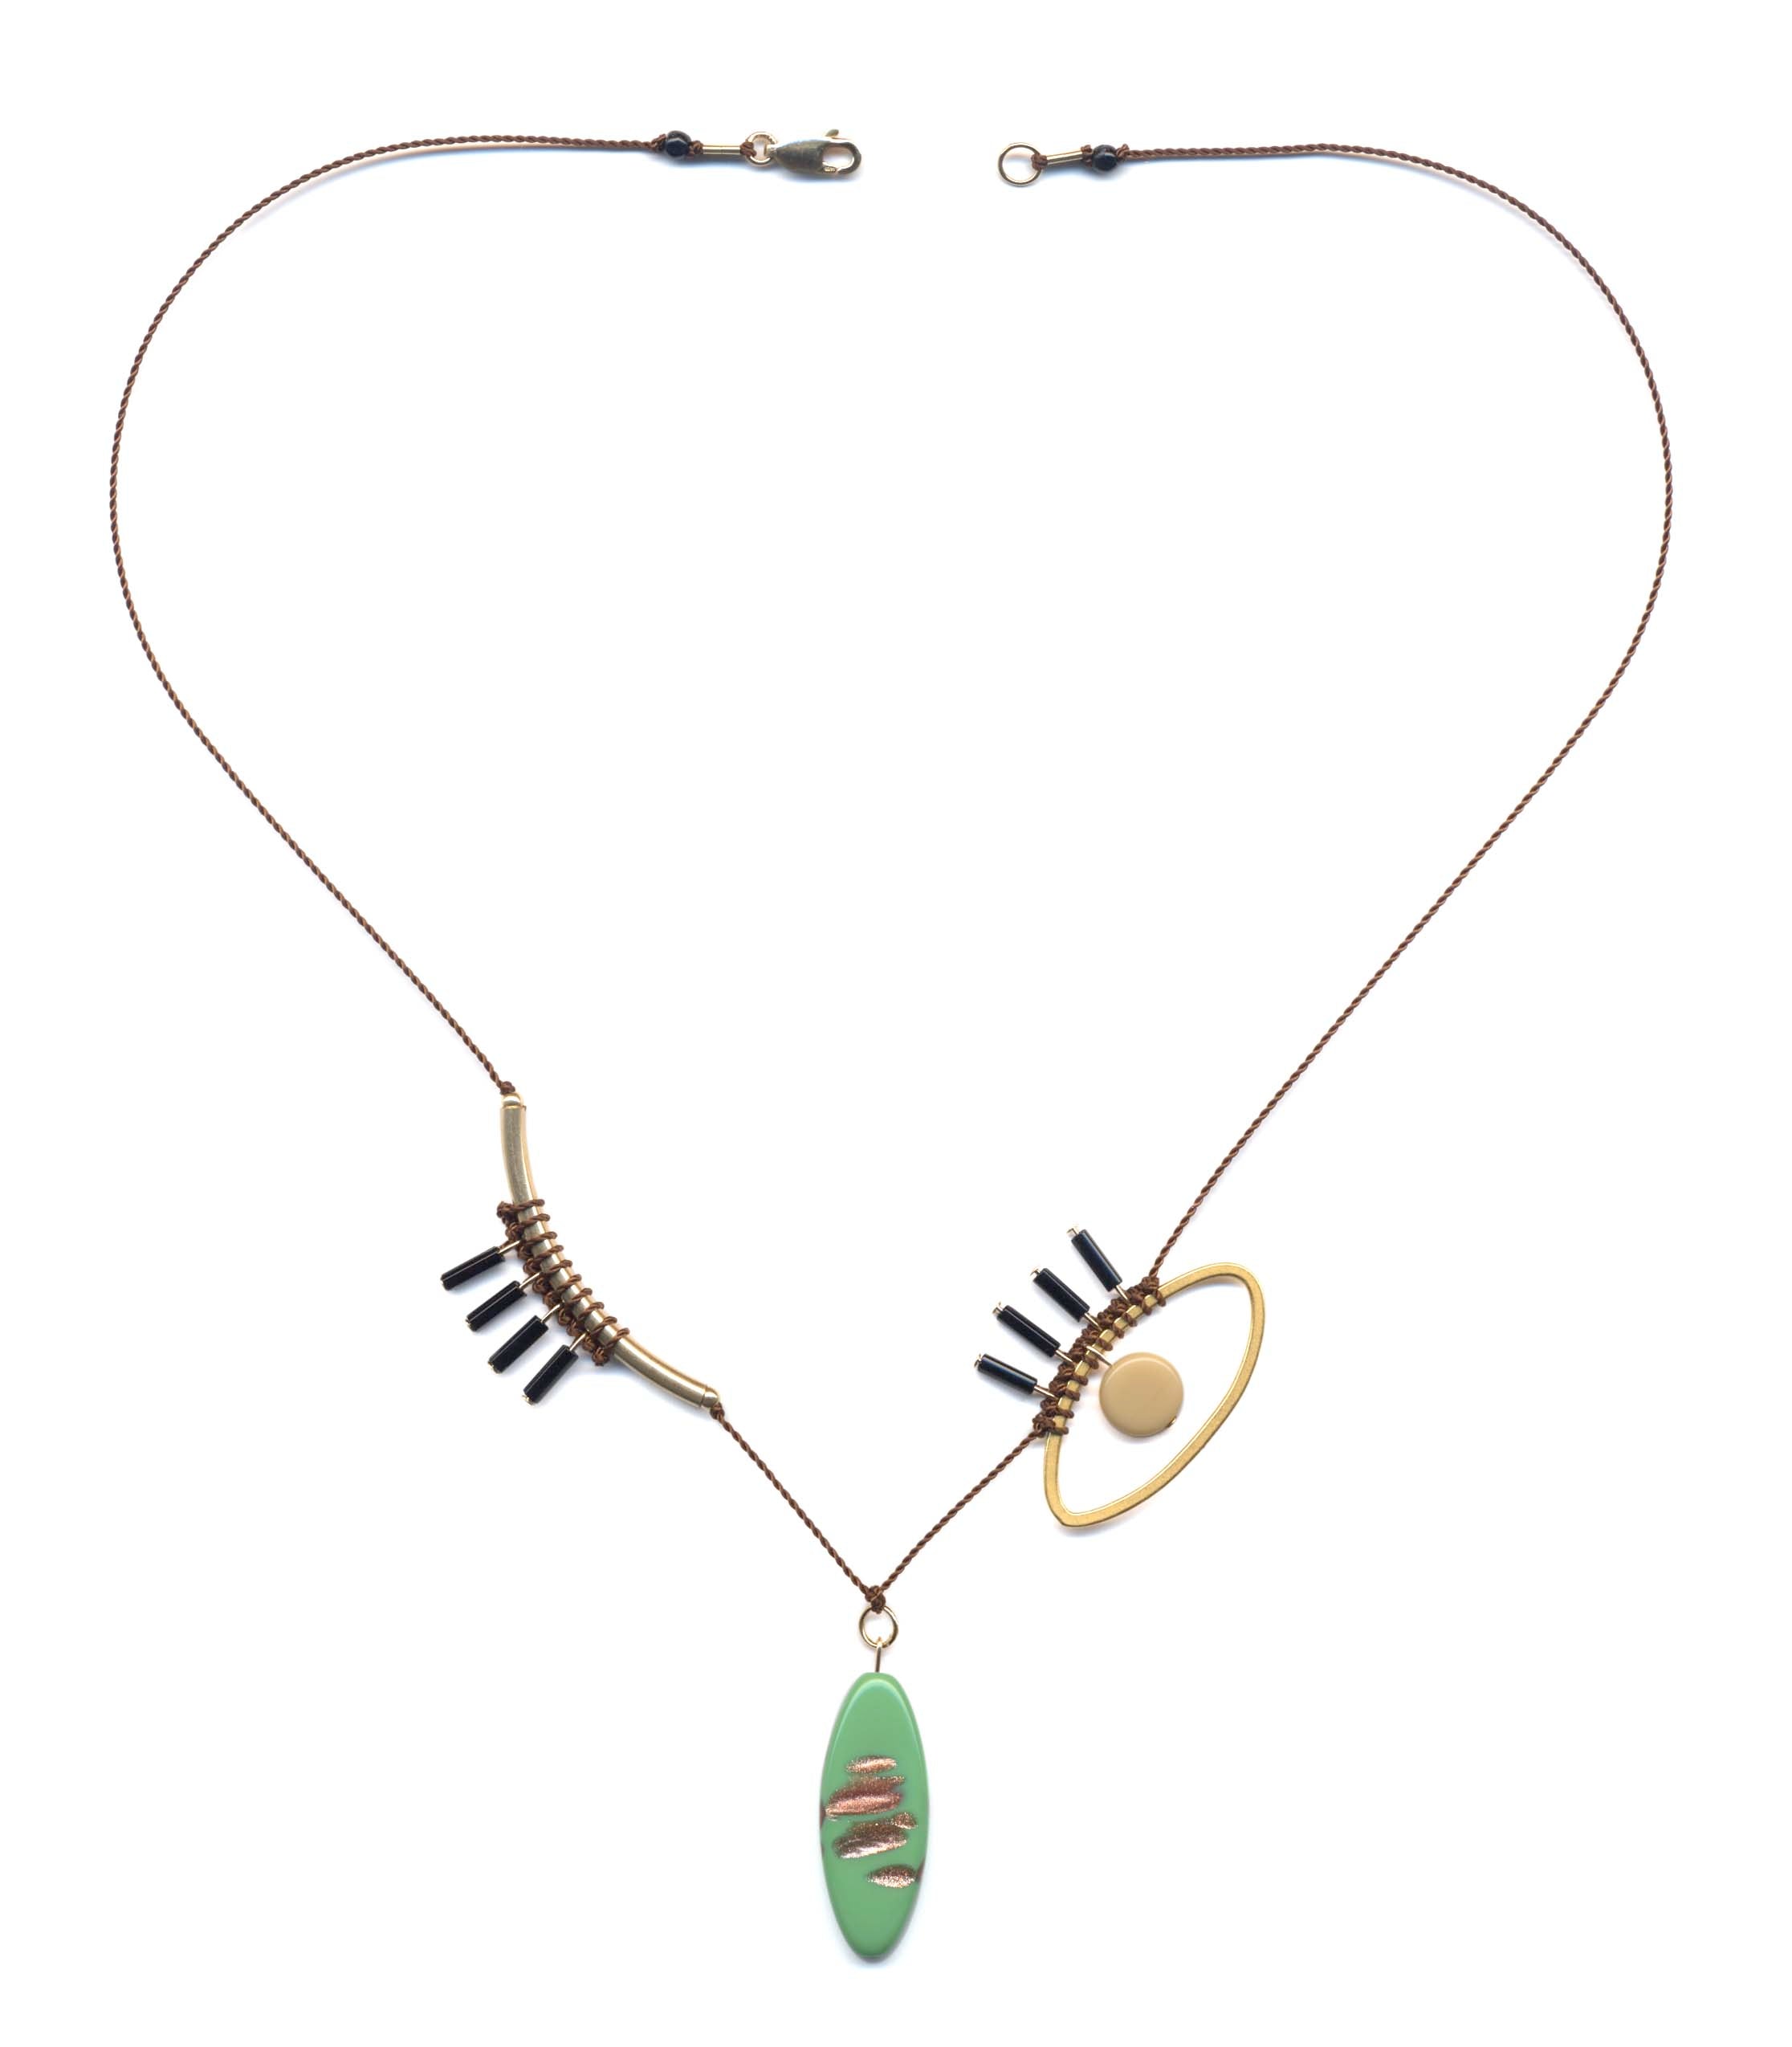 N2057 Pablo Picasso – Green Drop Necklace